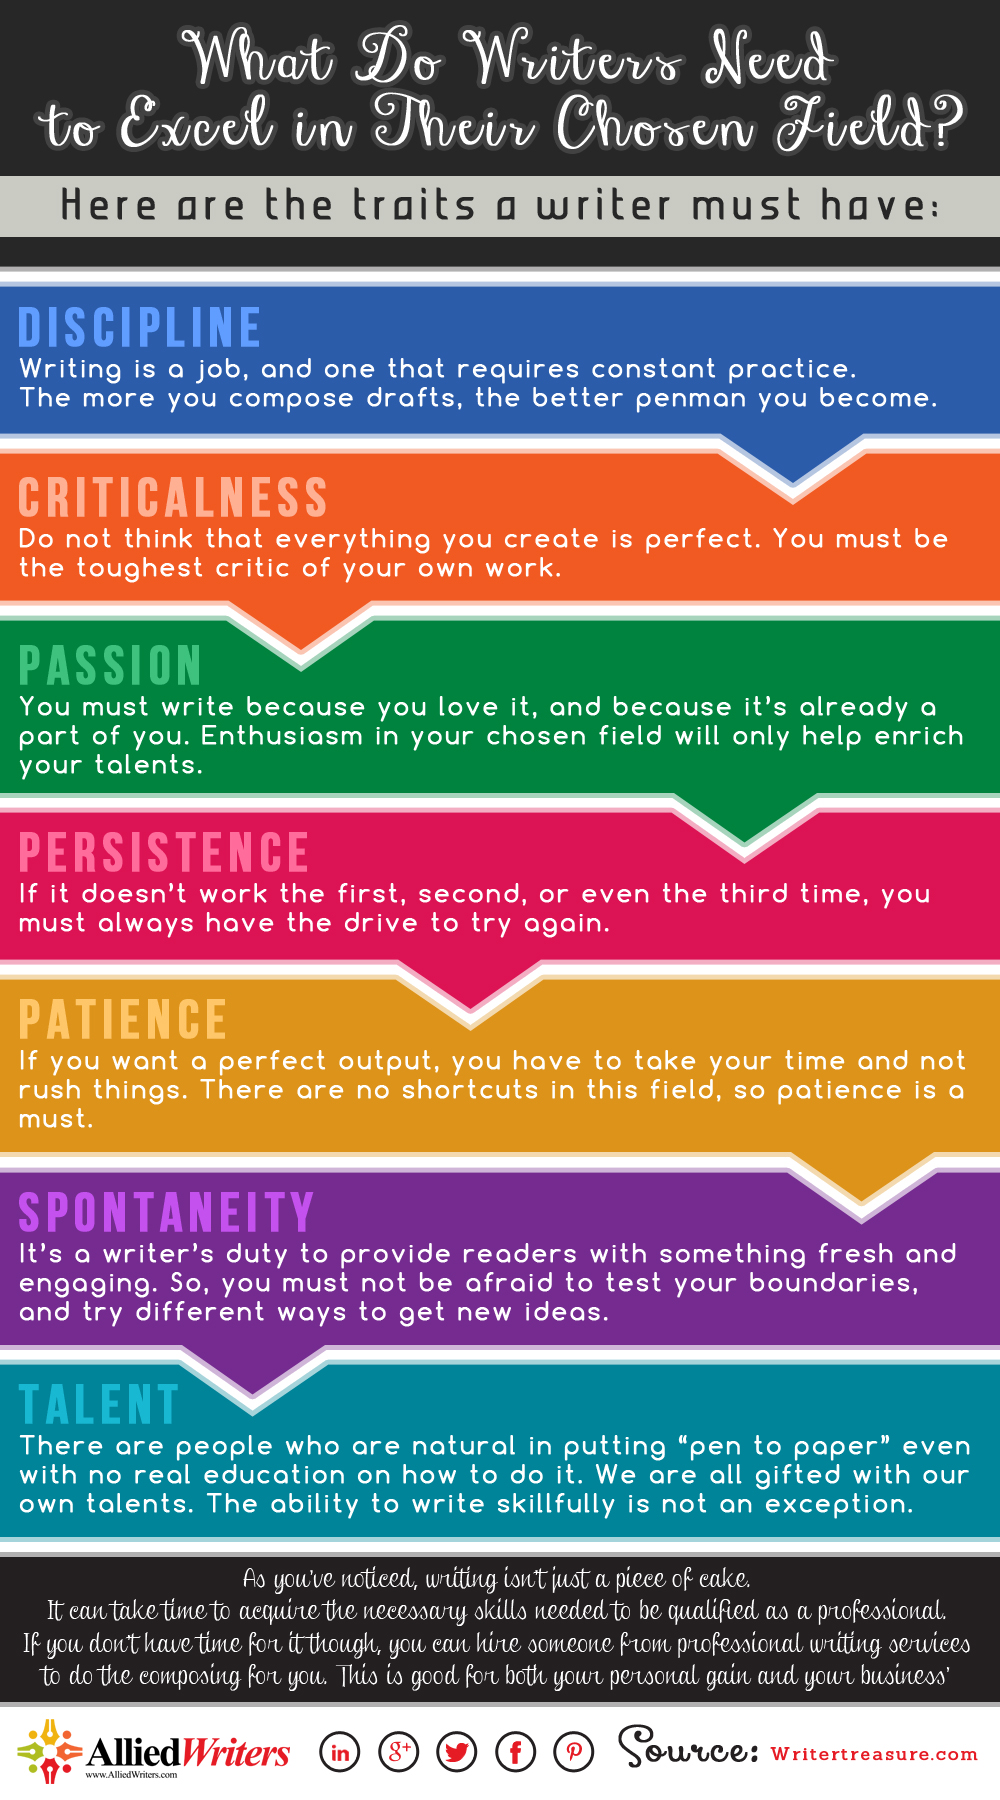 What Do Writers Need to Excel in Their Chosen Field? [Infographic]